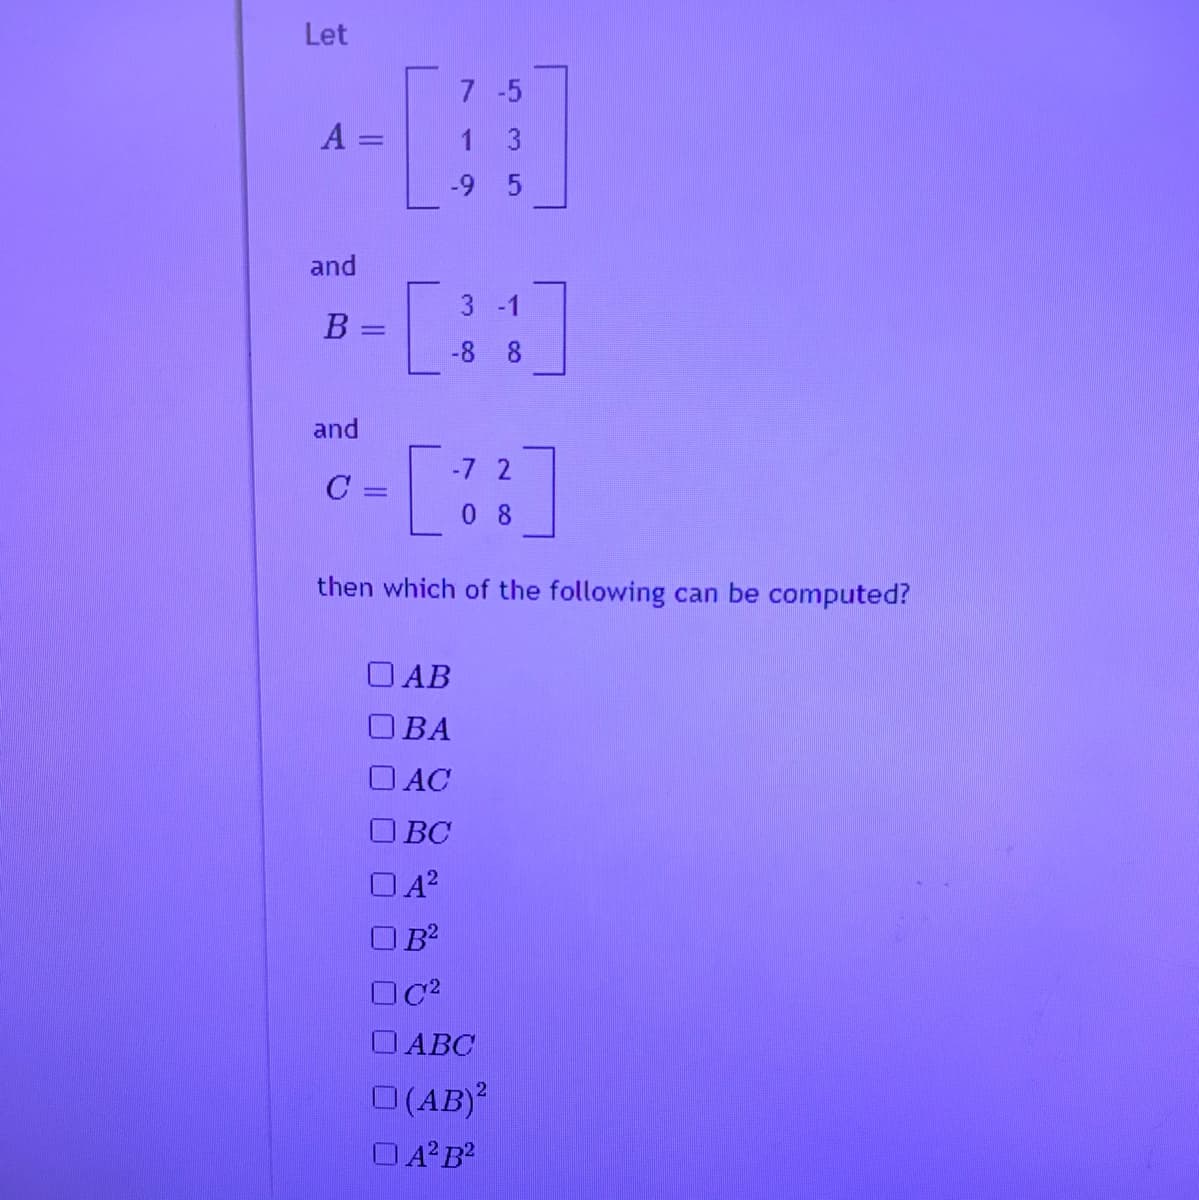 Let
7 -5
A =
1 3
-9 5
and
3 -1
-8 8
and
-7 2
C :
0 8
then which of the following can be computed?
O AB
OBA
O AC
O BC
O ABC
O(AB)?
OA B?
